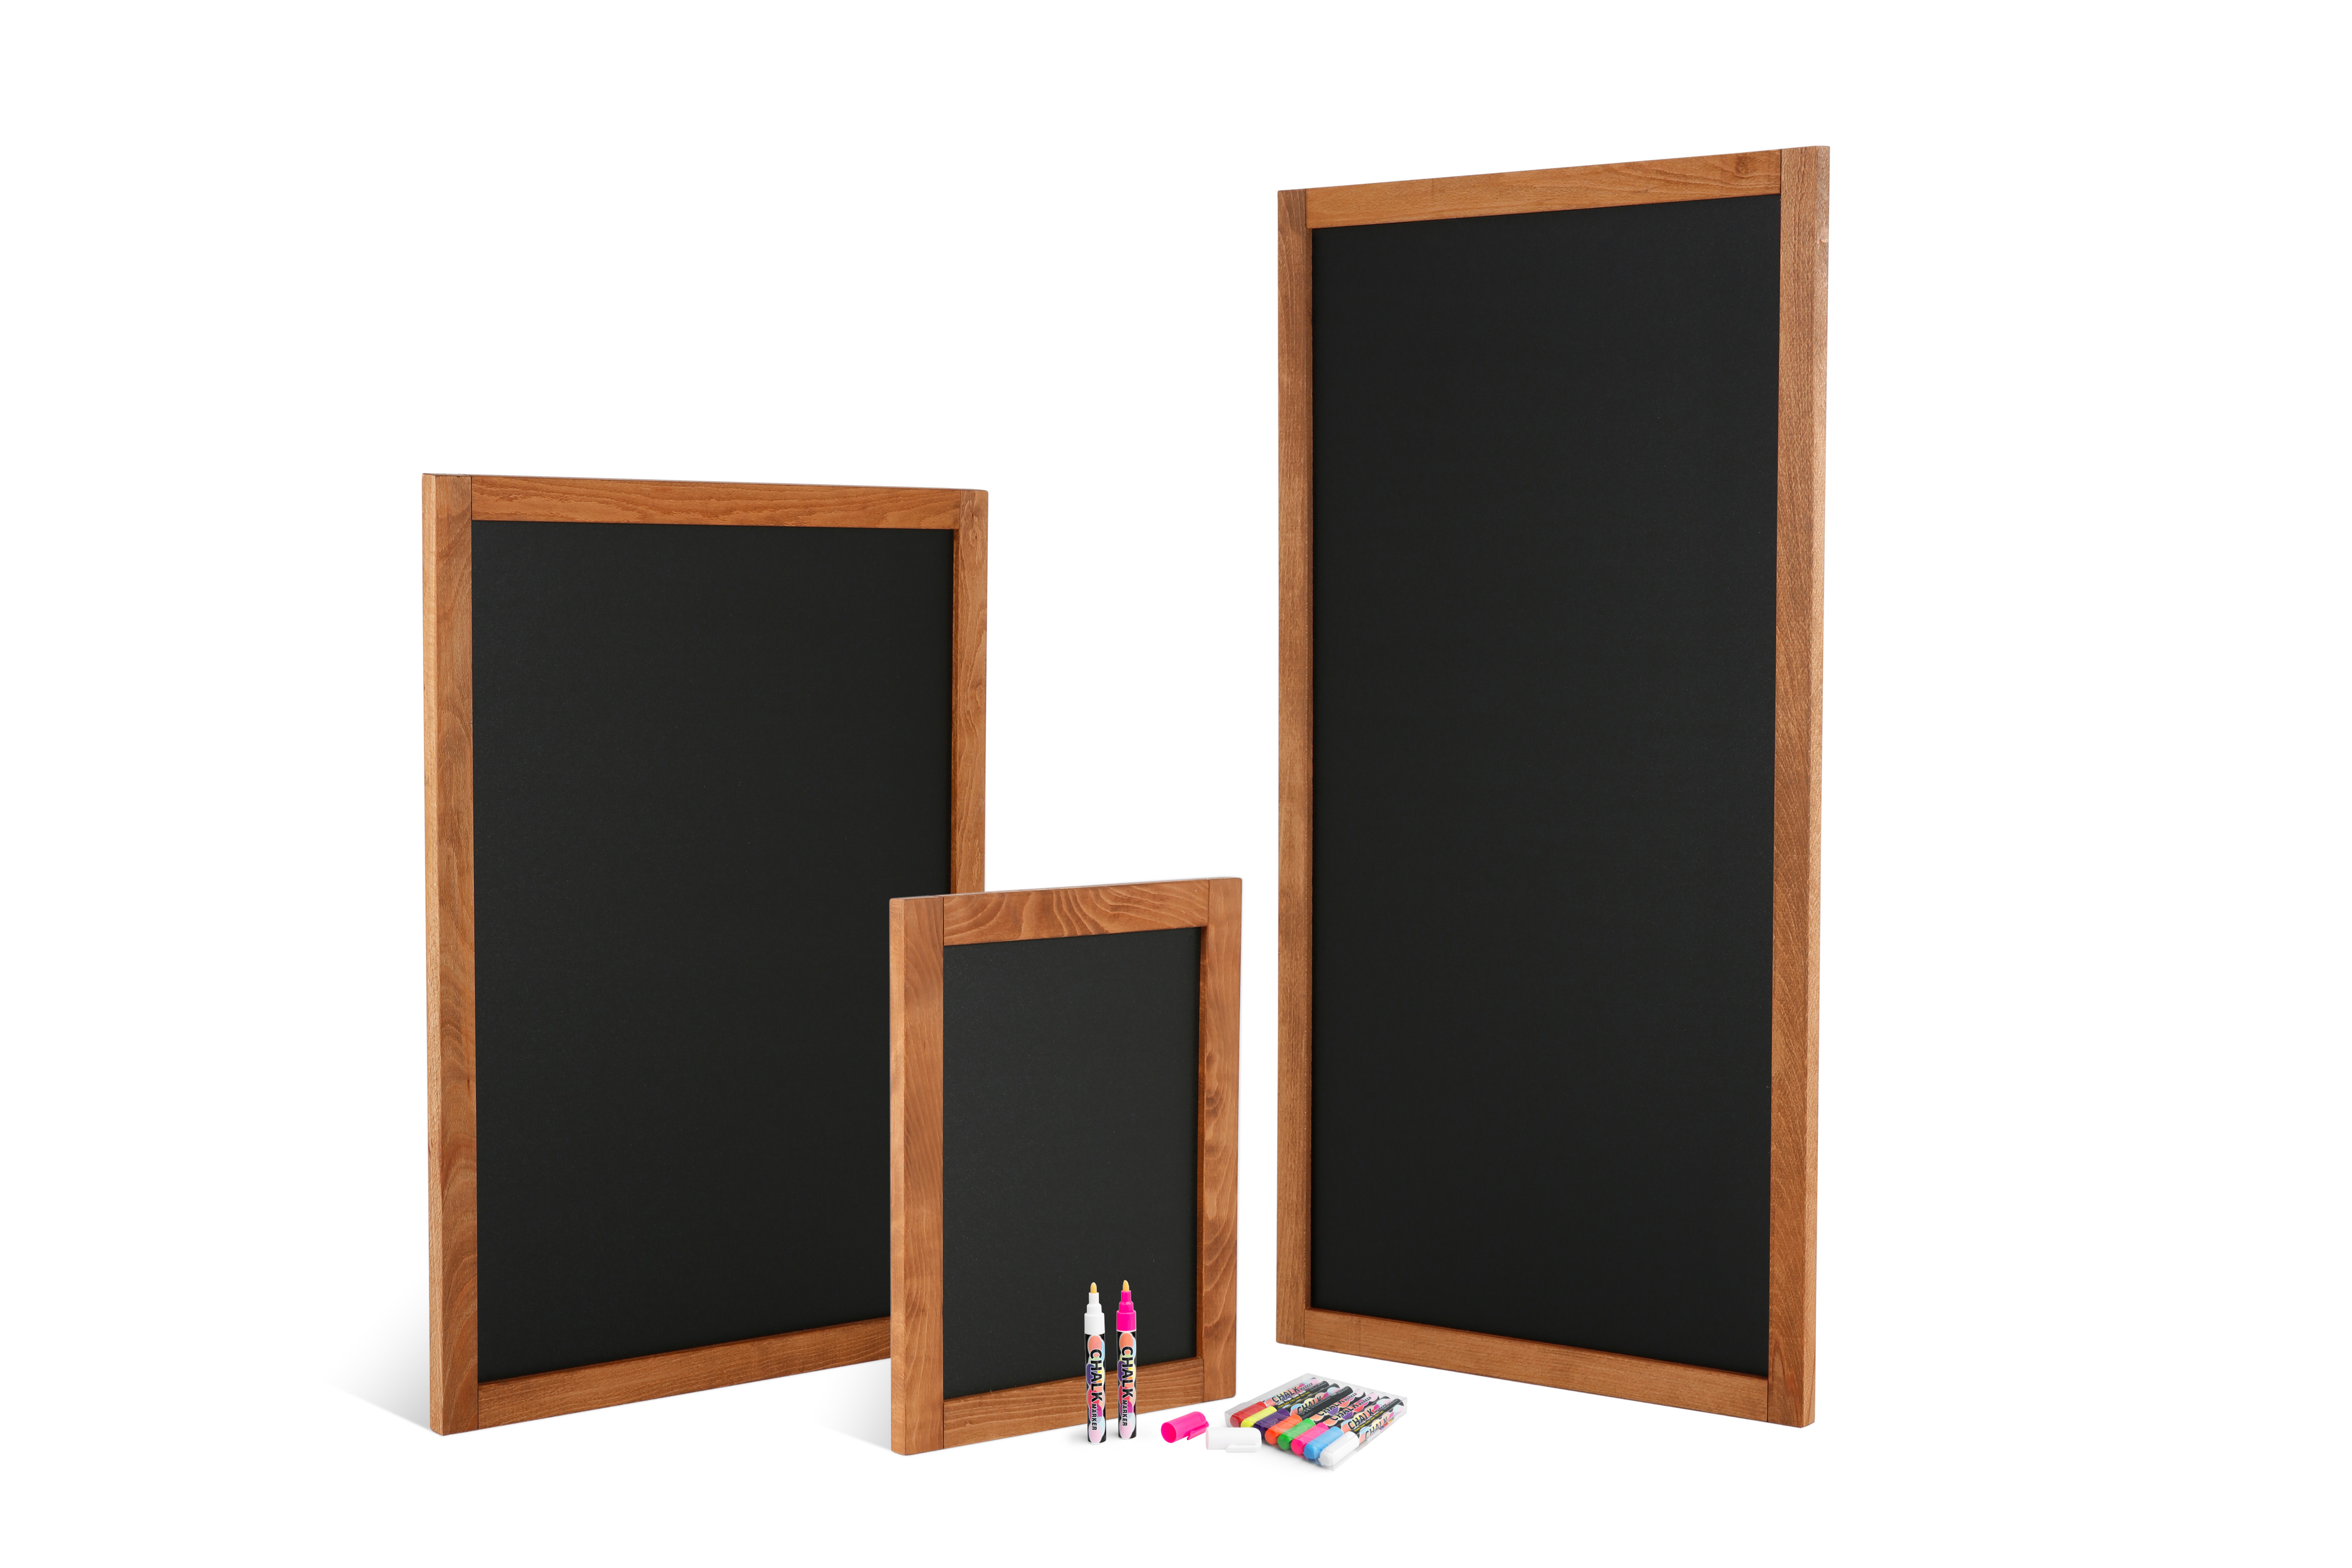 Wooden Tabletop Display with Chalkboard